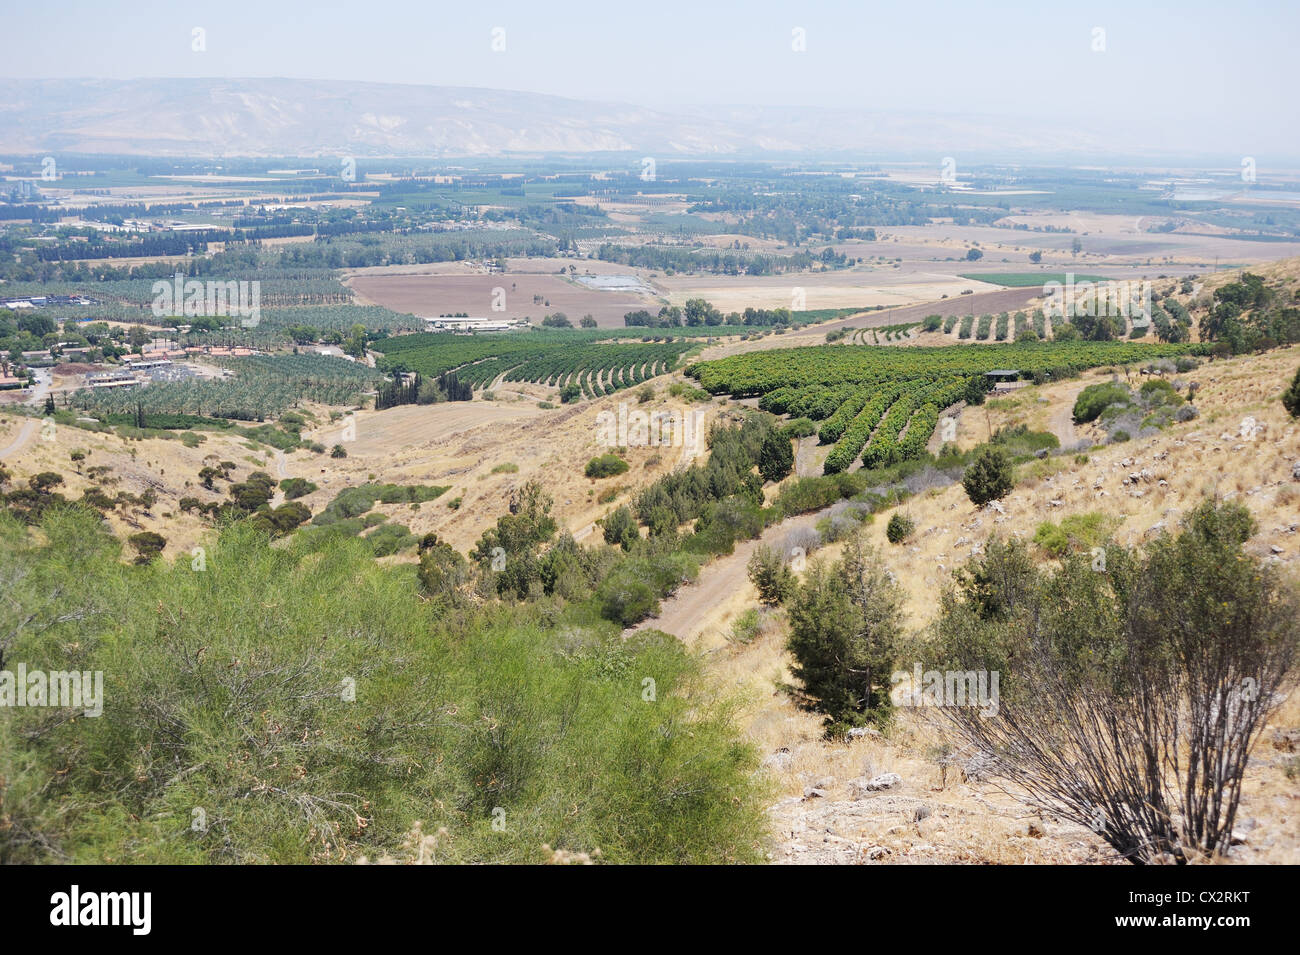 South shore of Lake Kinneret, the beginning of the Jordan River and the Jordan Valley. Stock Photo